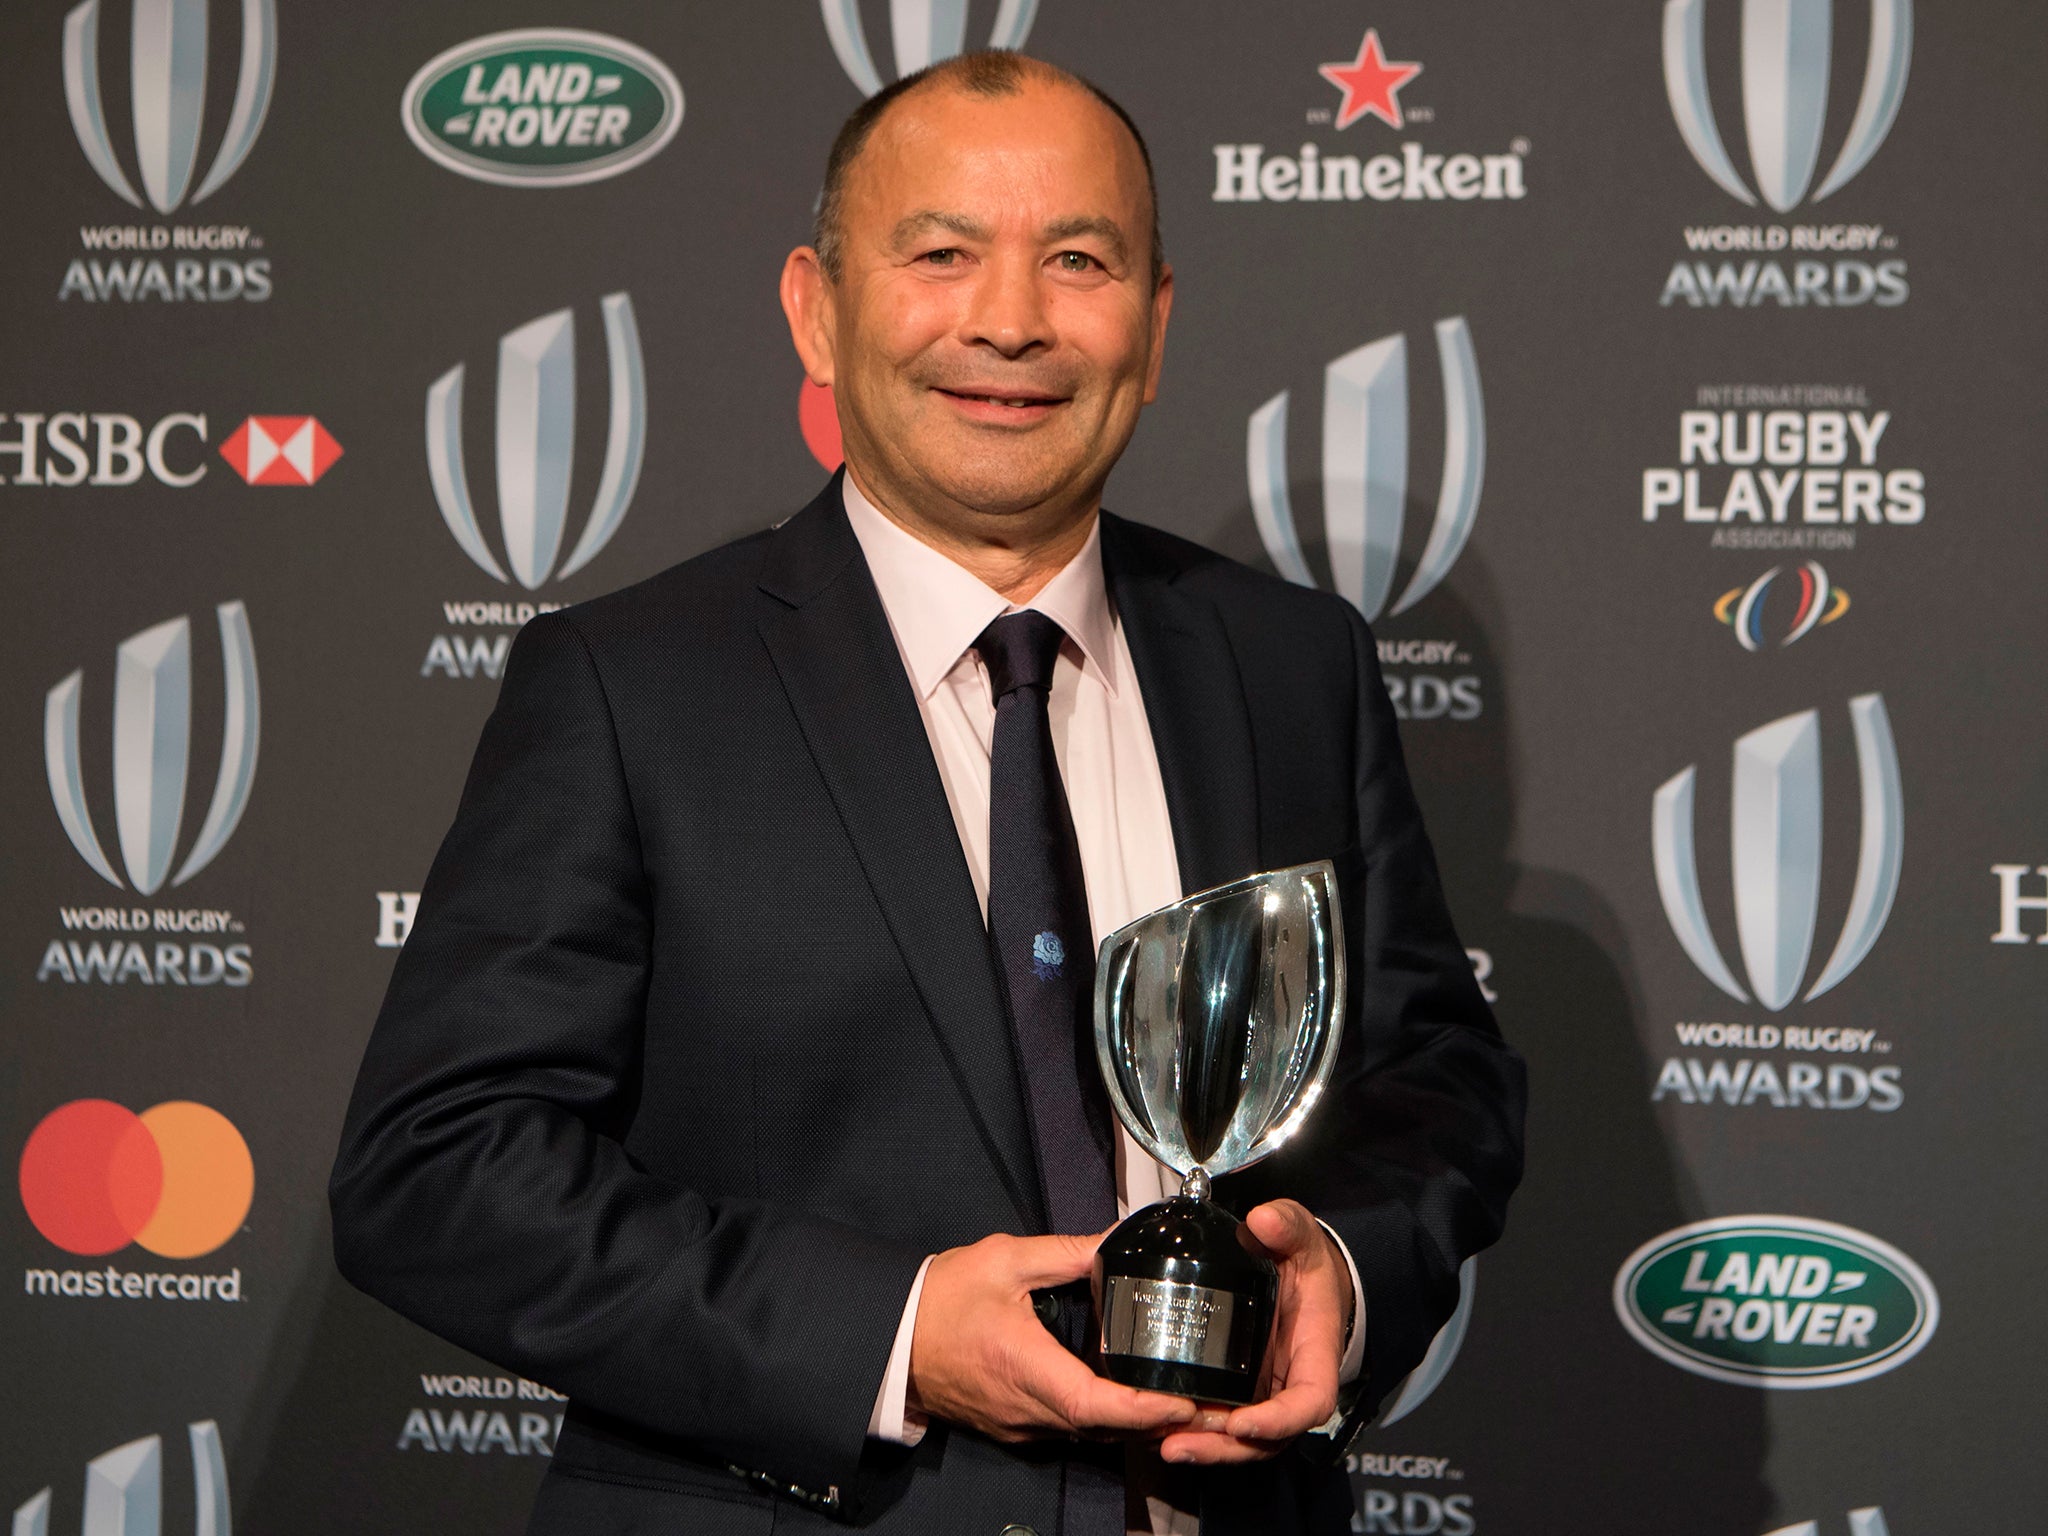 &#13;
Jones was named Coach of the Year at the World Rugby awards last month &#13;